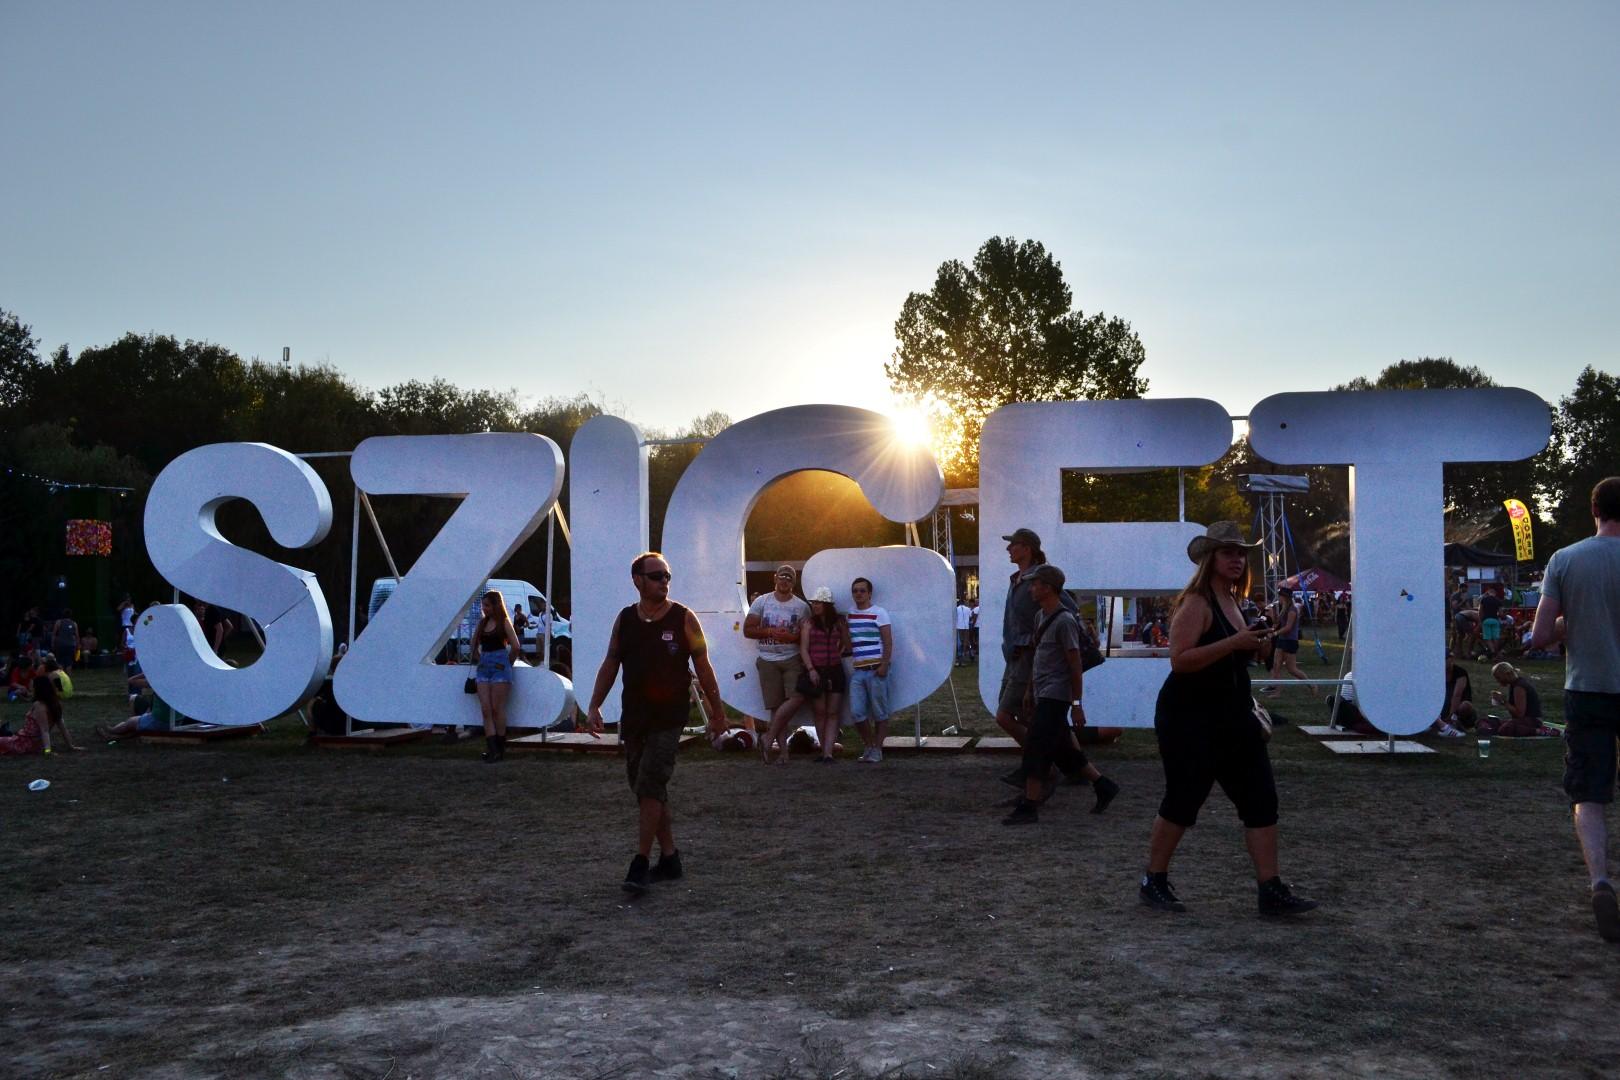 Sziget Festival Budapest - Over 4 Million Views Of YouTube Live Stream